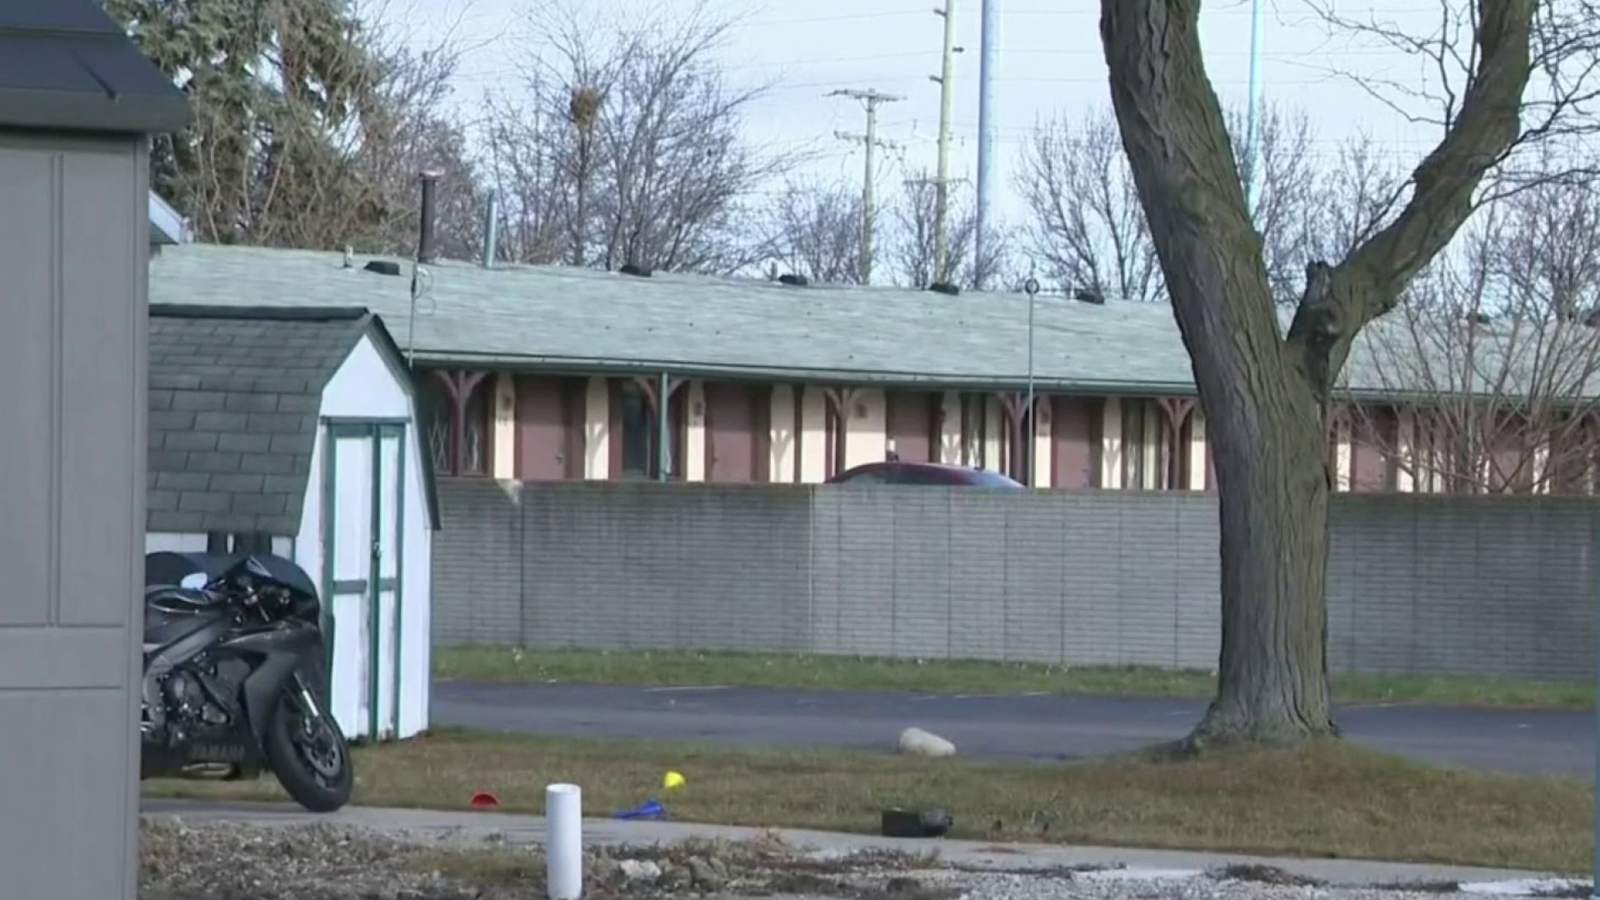 Neighbors in Madison Heights say motel arrest shootout damaged their homes